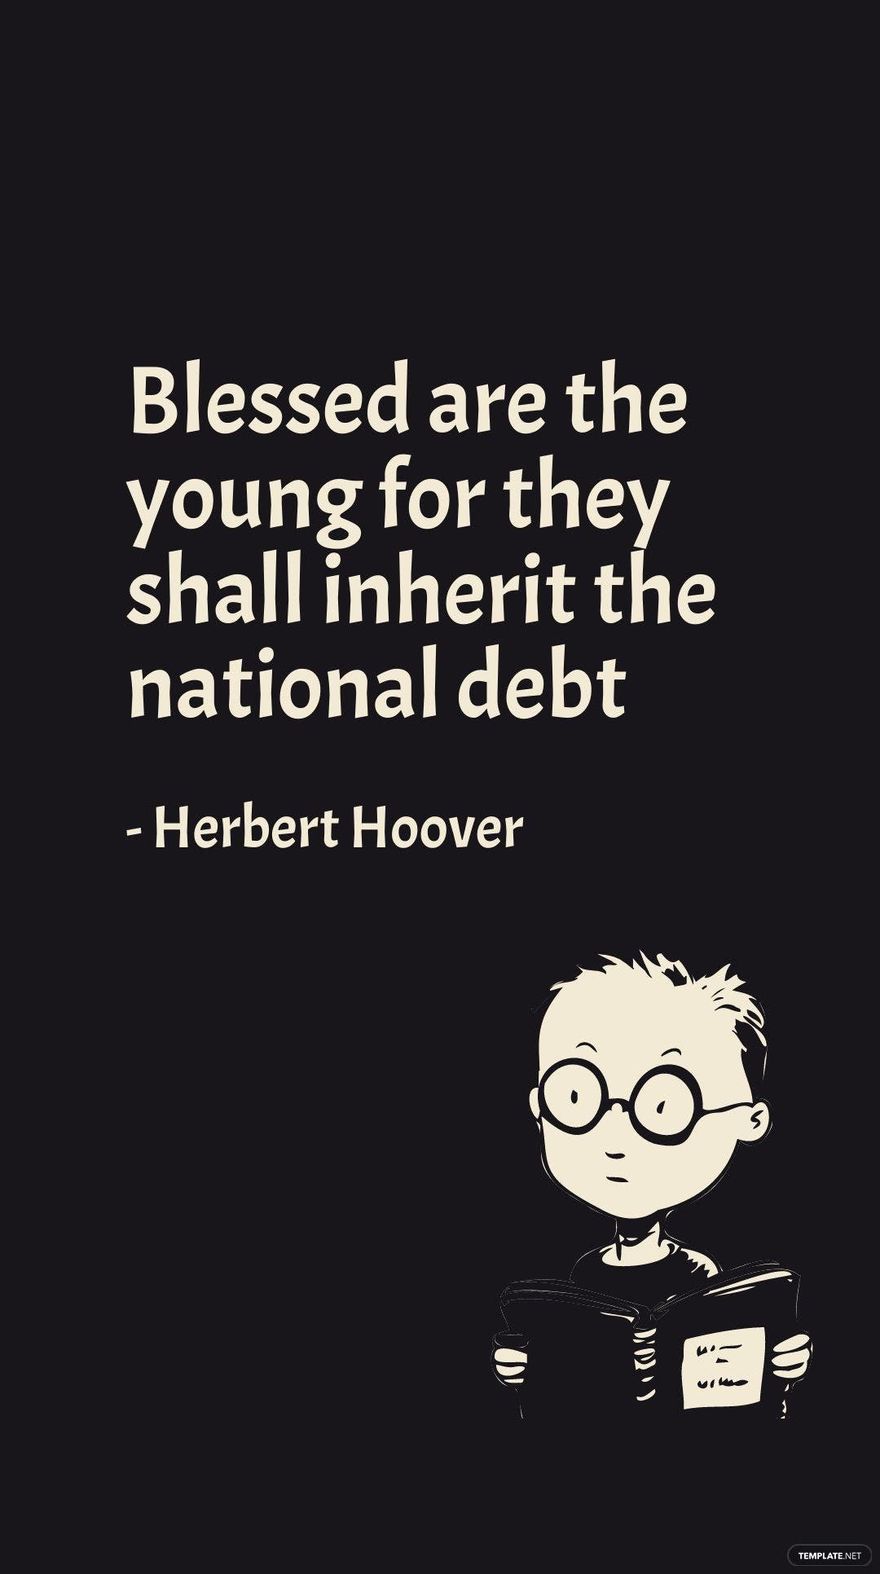 Free Herbert Hoover - Blessed are the young for they shall inherit the national debt in JPG